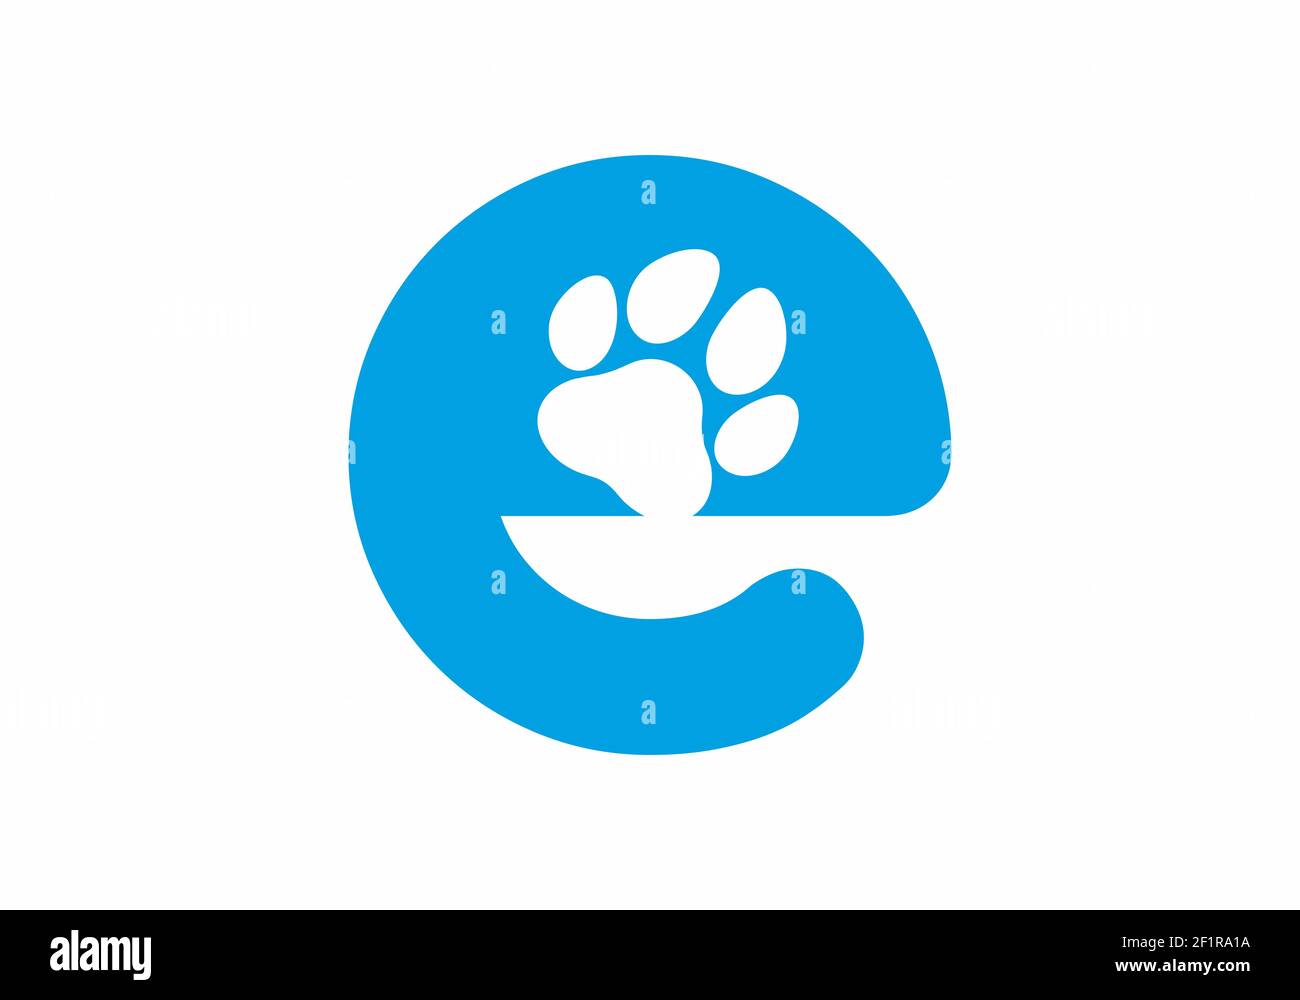 Blue e initial letter with animal paw shape design Stock Vector